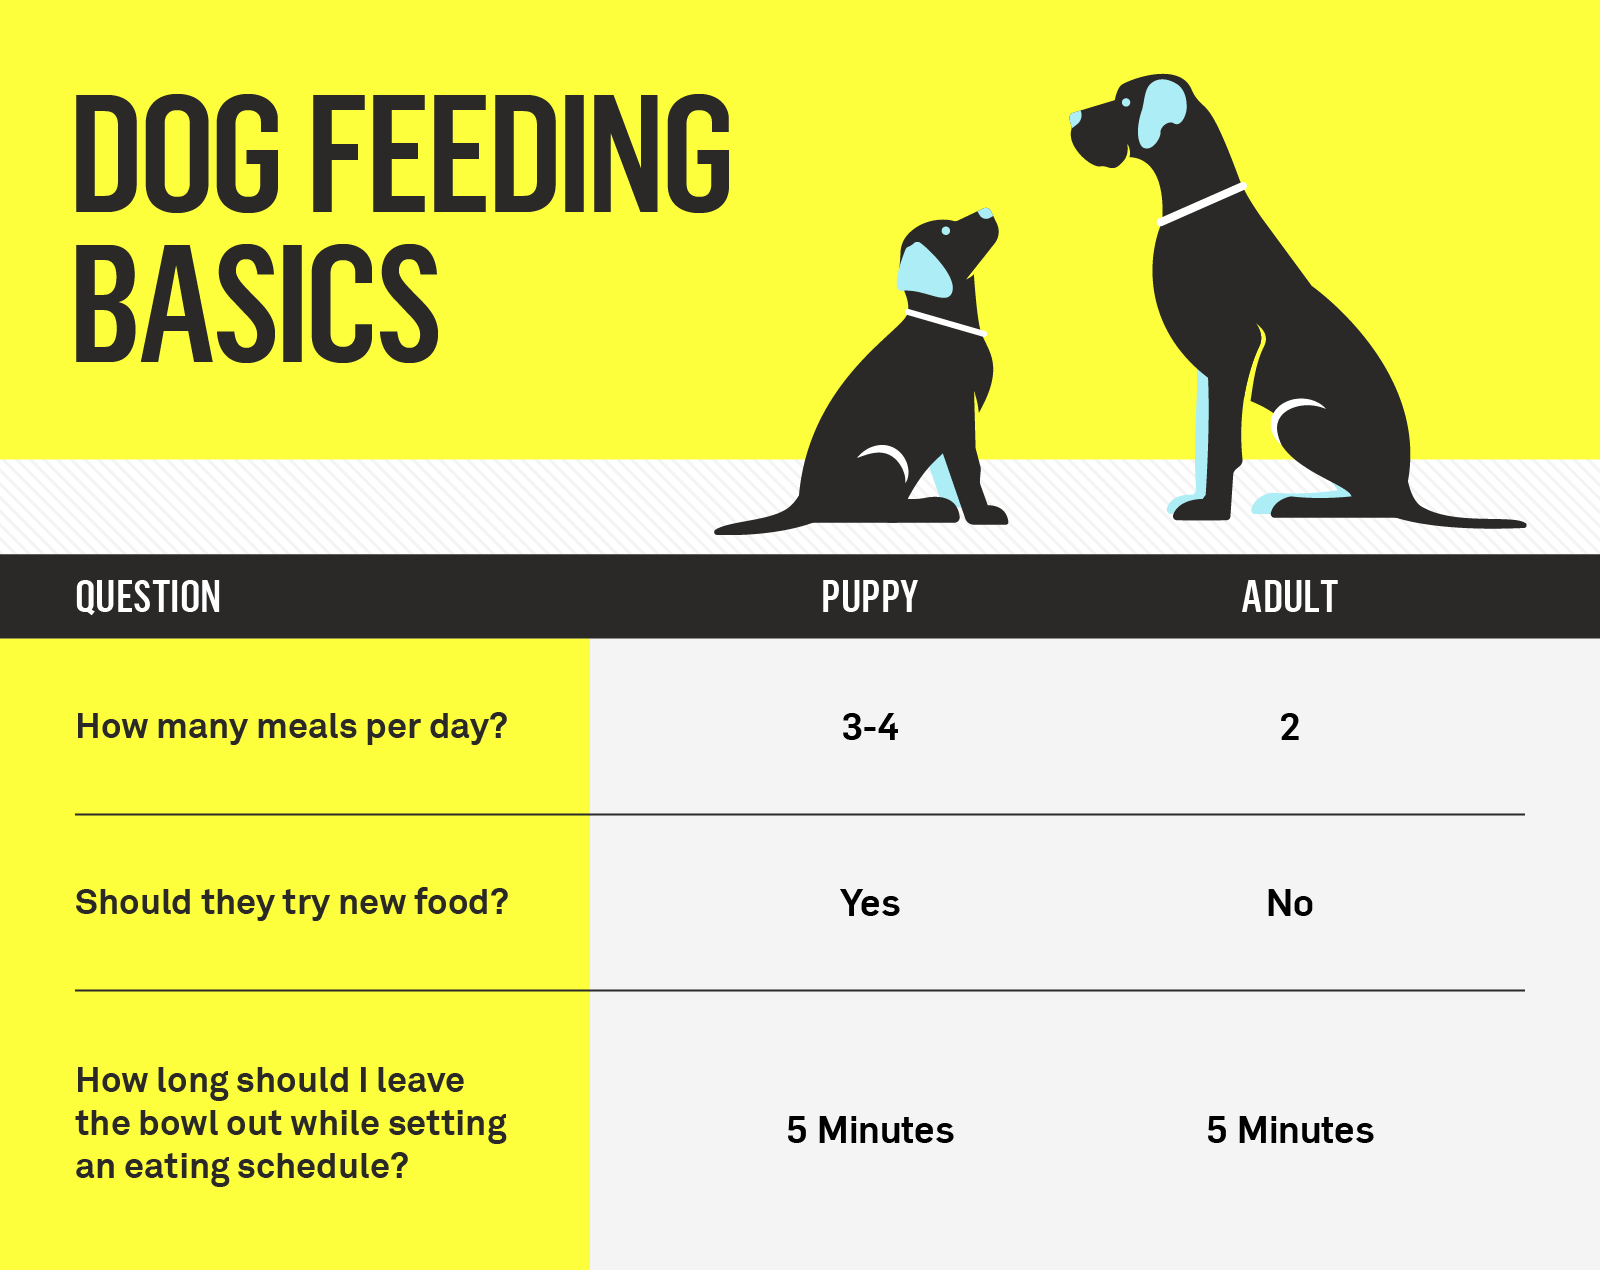 what are the best times to feed a puppy